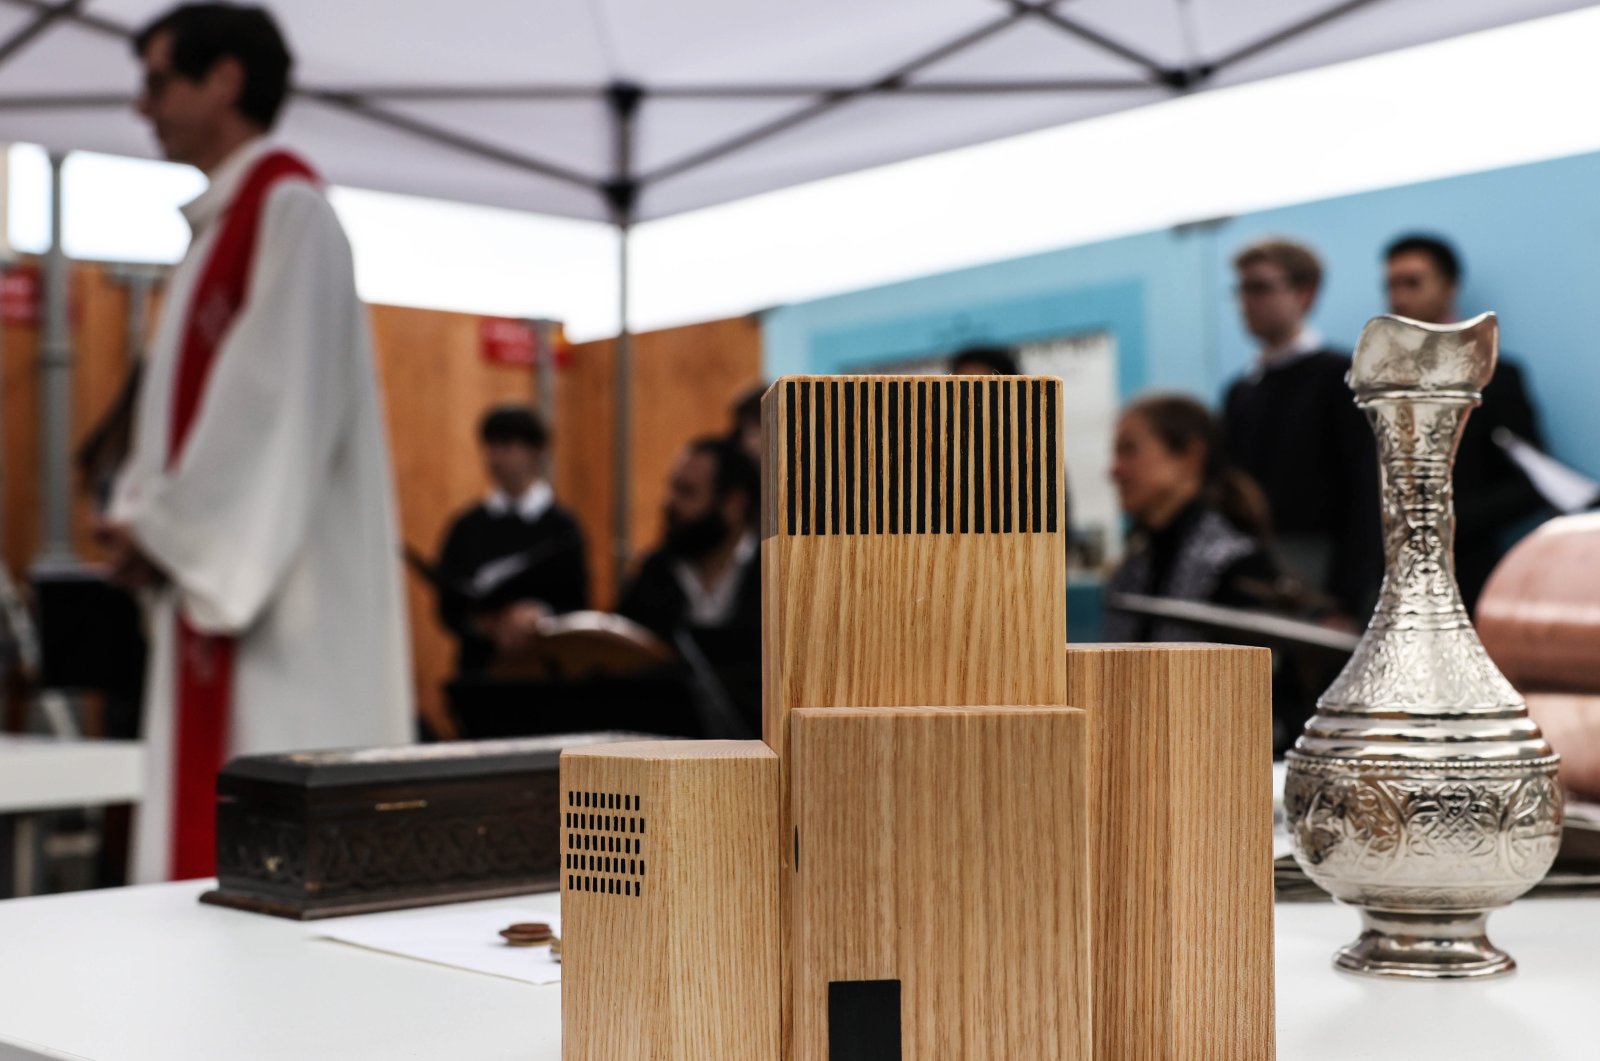 A view of the wooden model of the multi-religious "House of One" building during its laying of the foundation stone ceremony in Berlin, Germany, May 27, 2021. (EPA Photo)